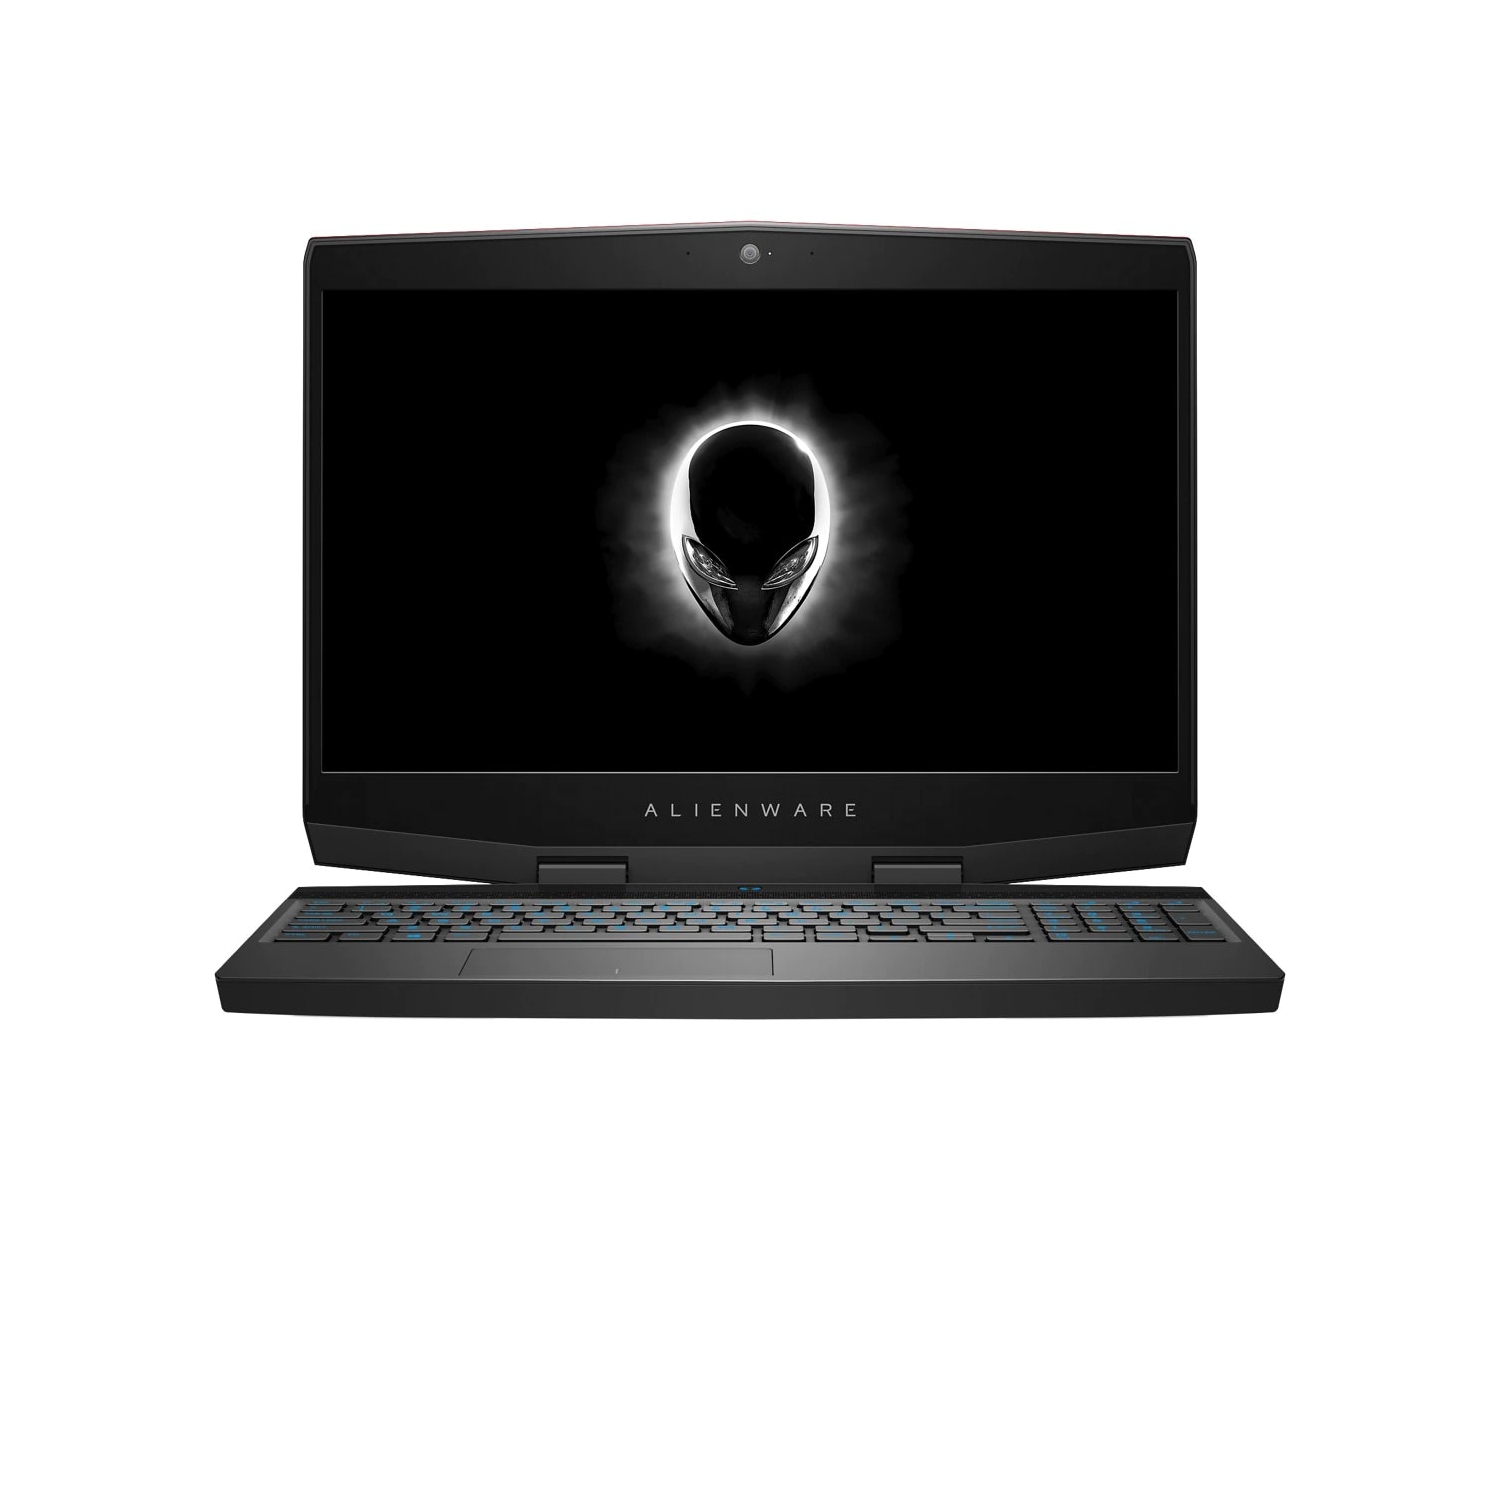 Refurbished (Excellent) - Dell Alienware m15 Gaming Laptop (2018), 15.6" FHD, Core i7 - 1TB SSD + 1TB SSD - 32GB RAM - RTX 2070, 6 Cores @ 4.5 GHz Certified Refurbished